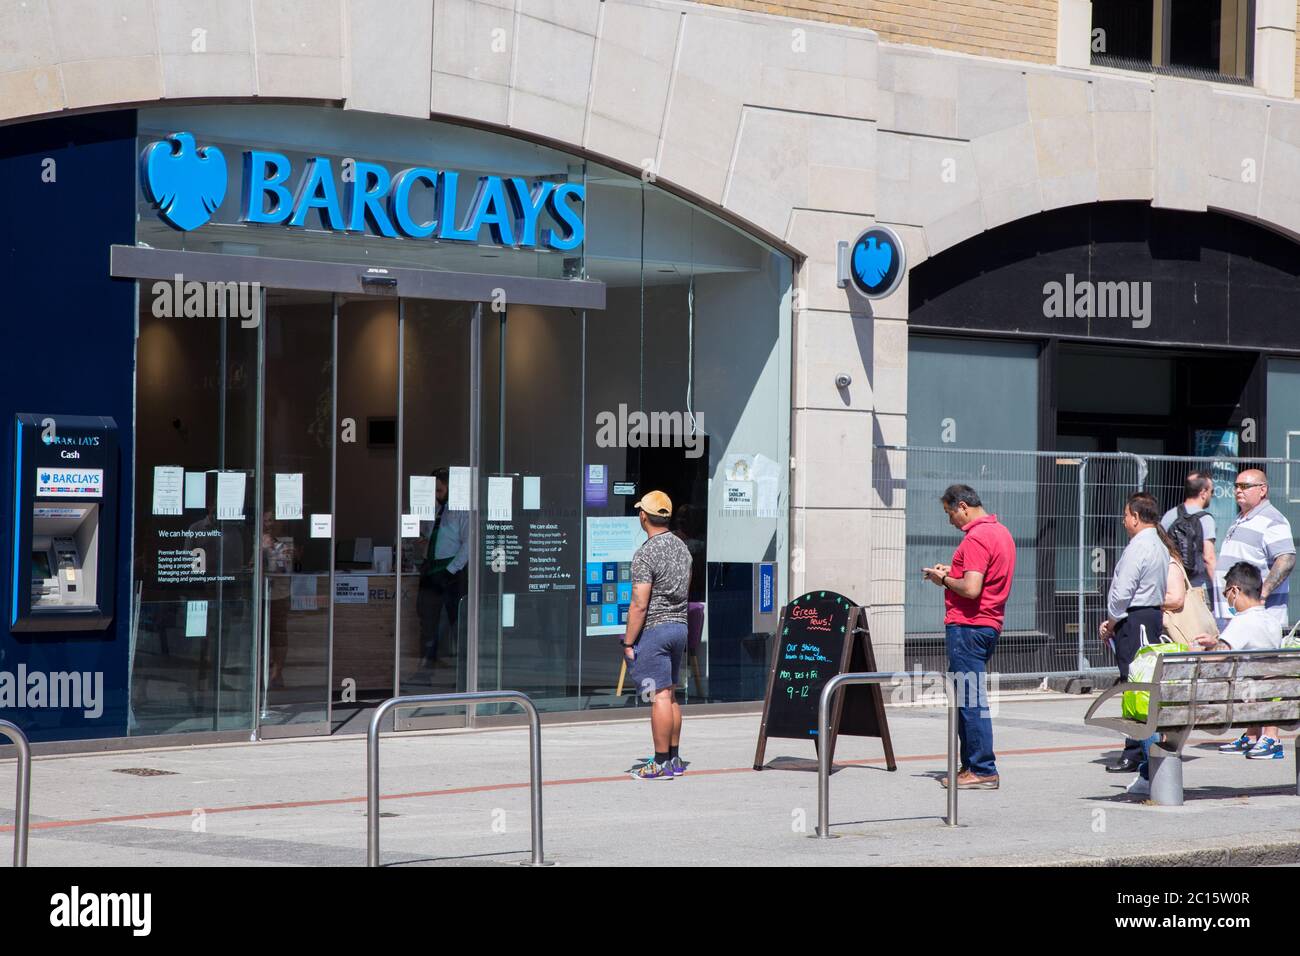 Barclays bank branch with people queuing and socially distancing due to coronavirus, Southampton Stock Photo